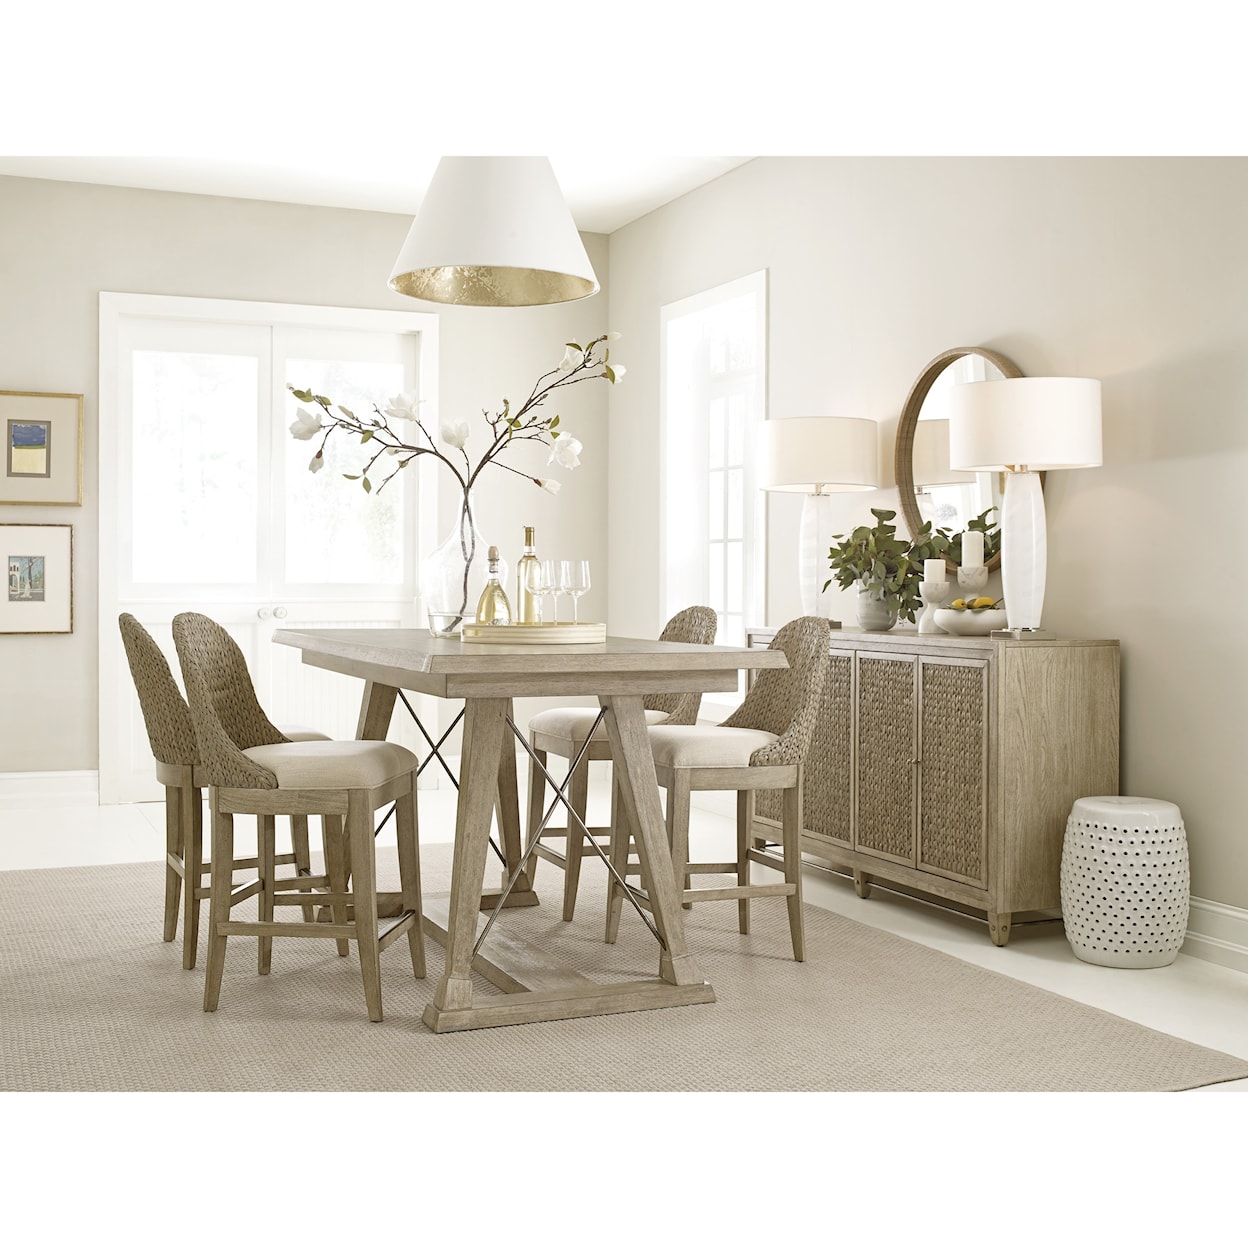 American Drew Vista Casual Dining Room Group